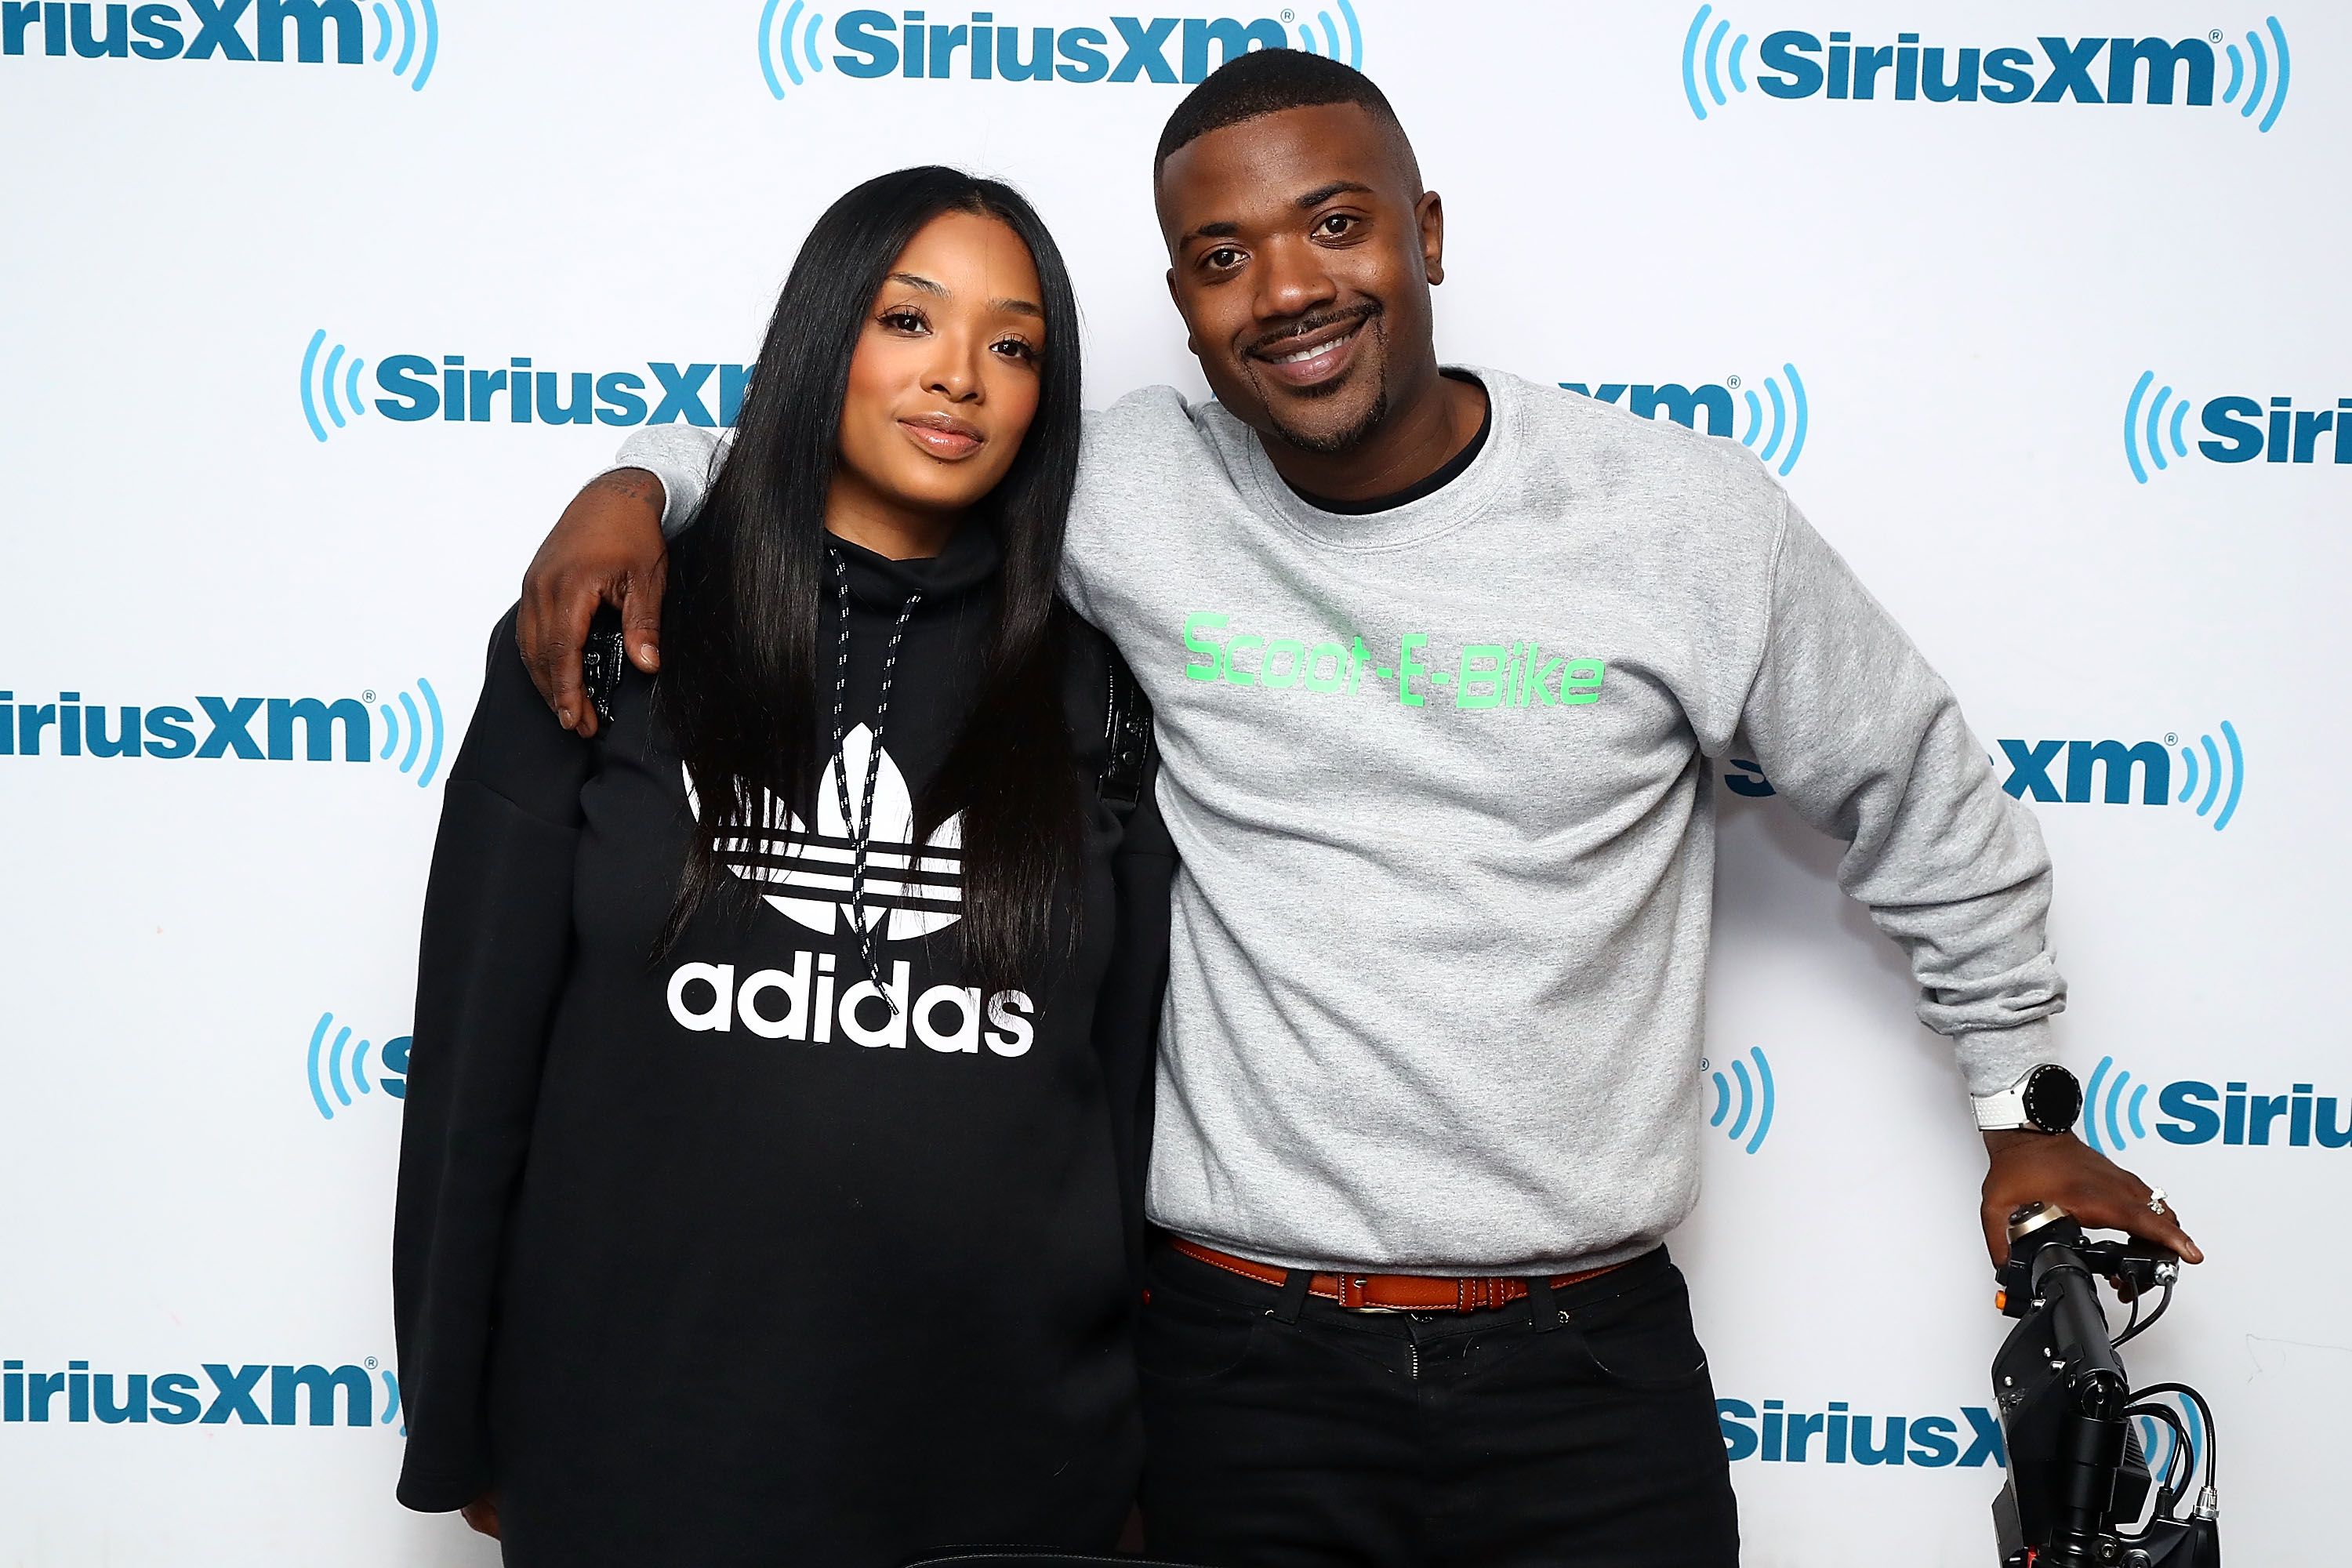 Princess Love and Ray J at the SiriusXM Studios on March 29, 2018 | Photo: Getty Images